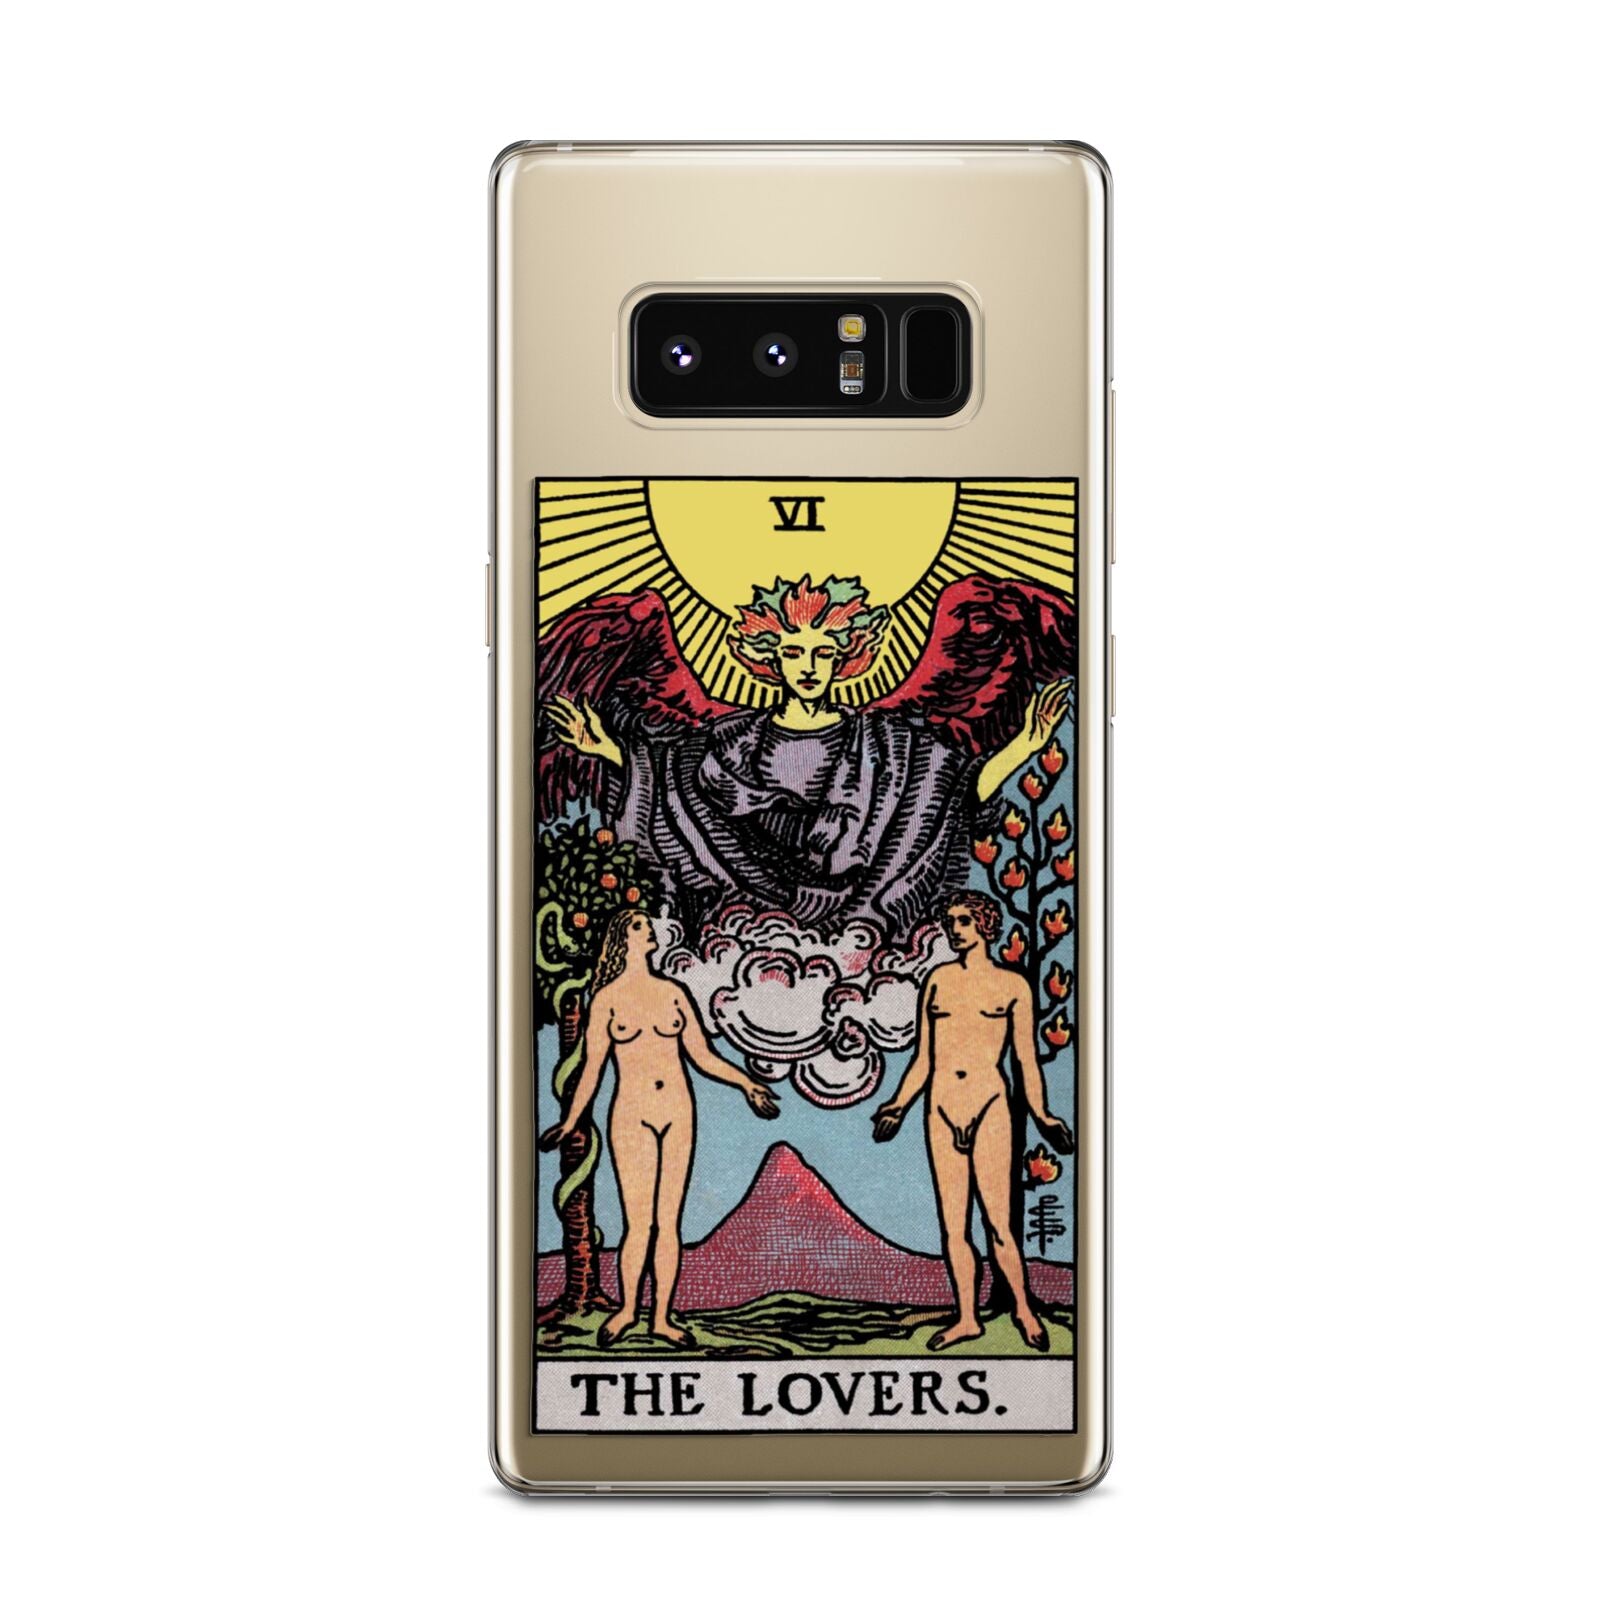 The Lovers Tarot Card Samsung Galaxy Note 8 Case